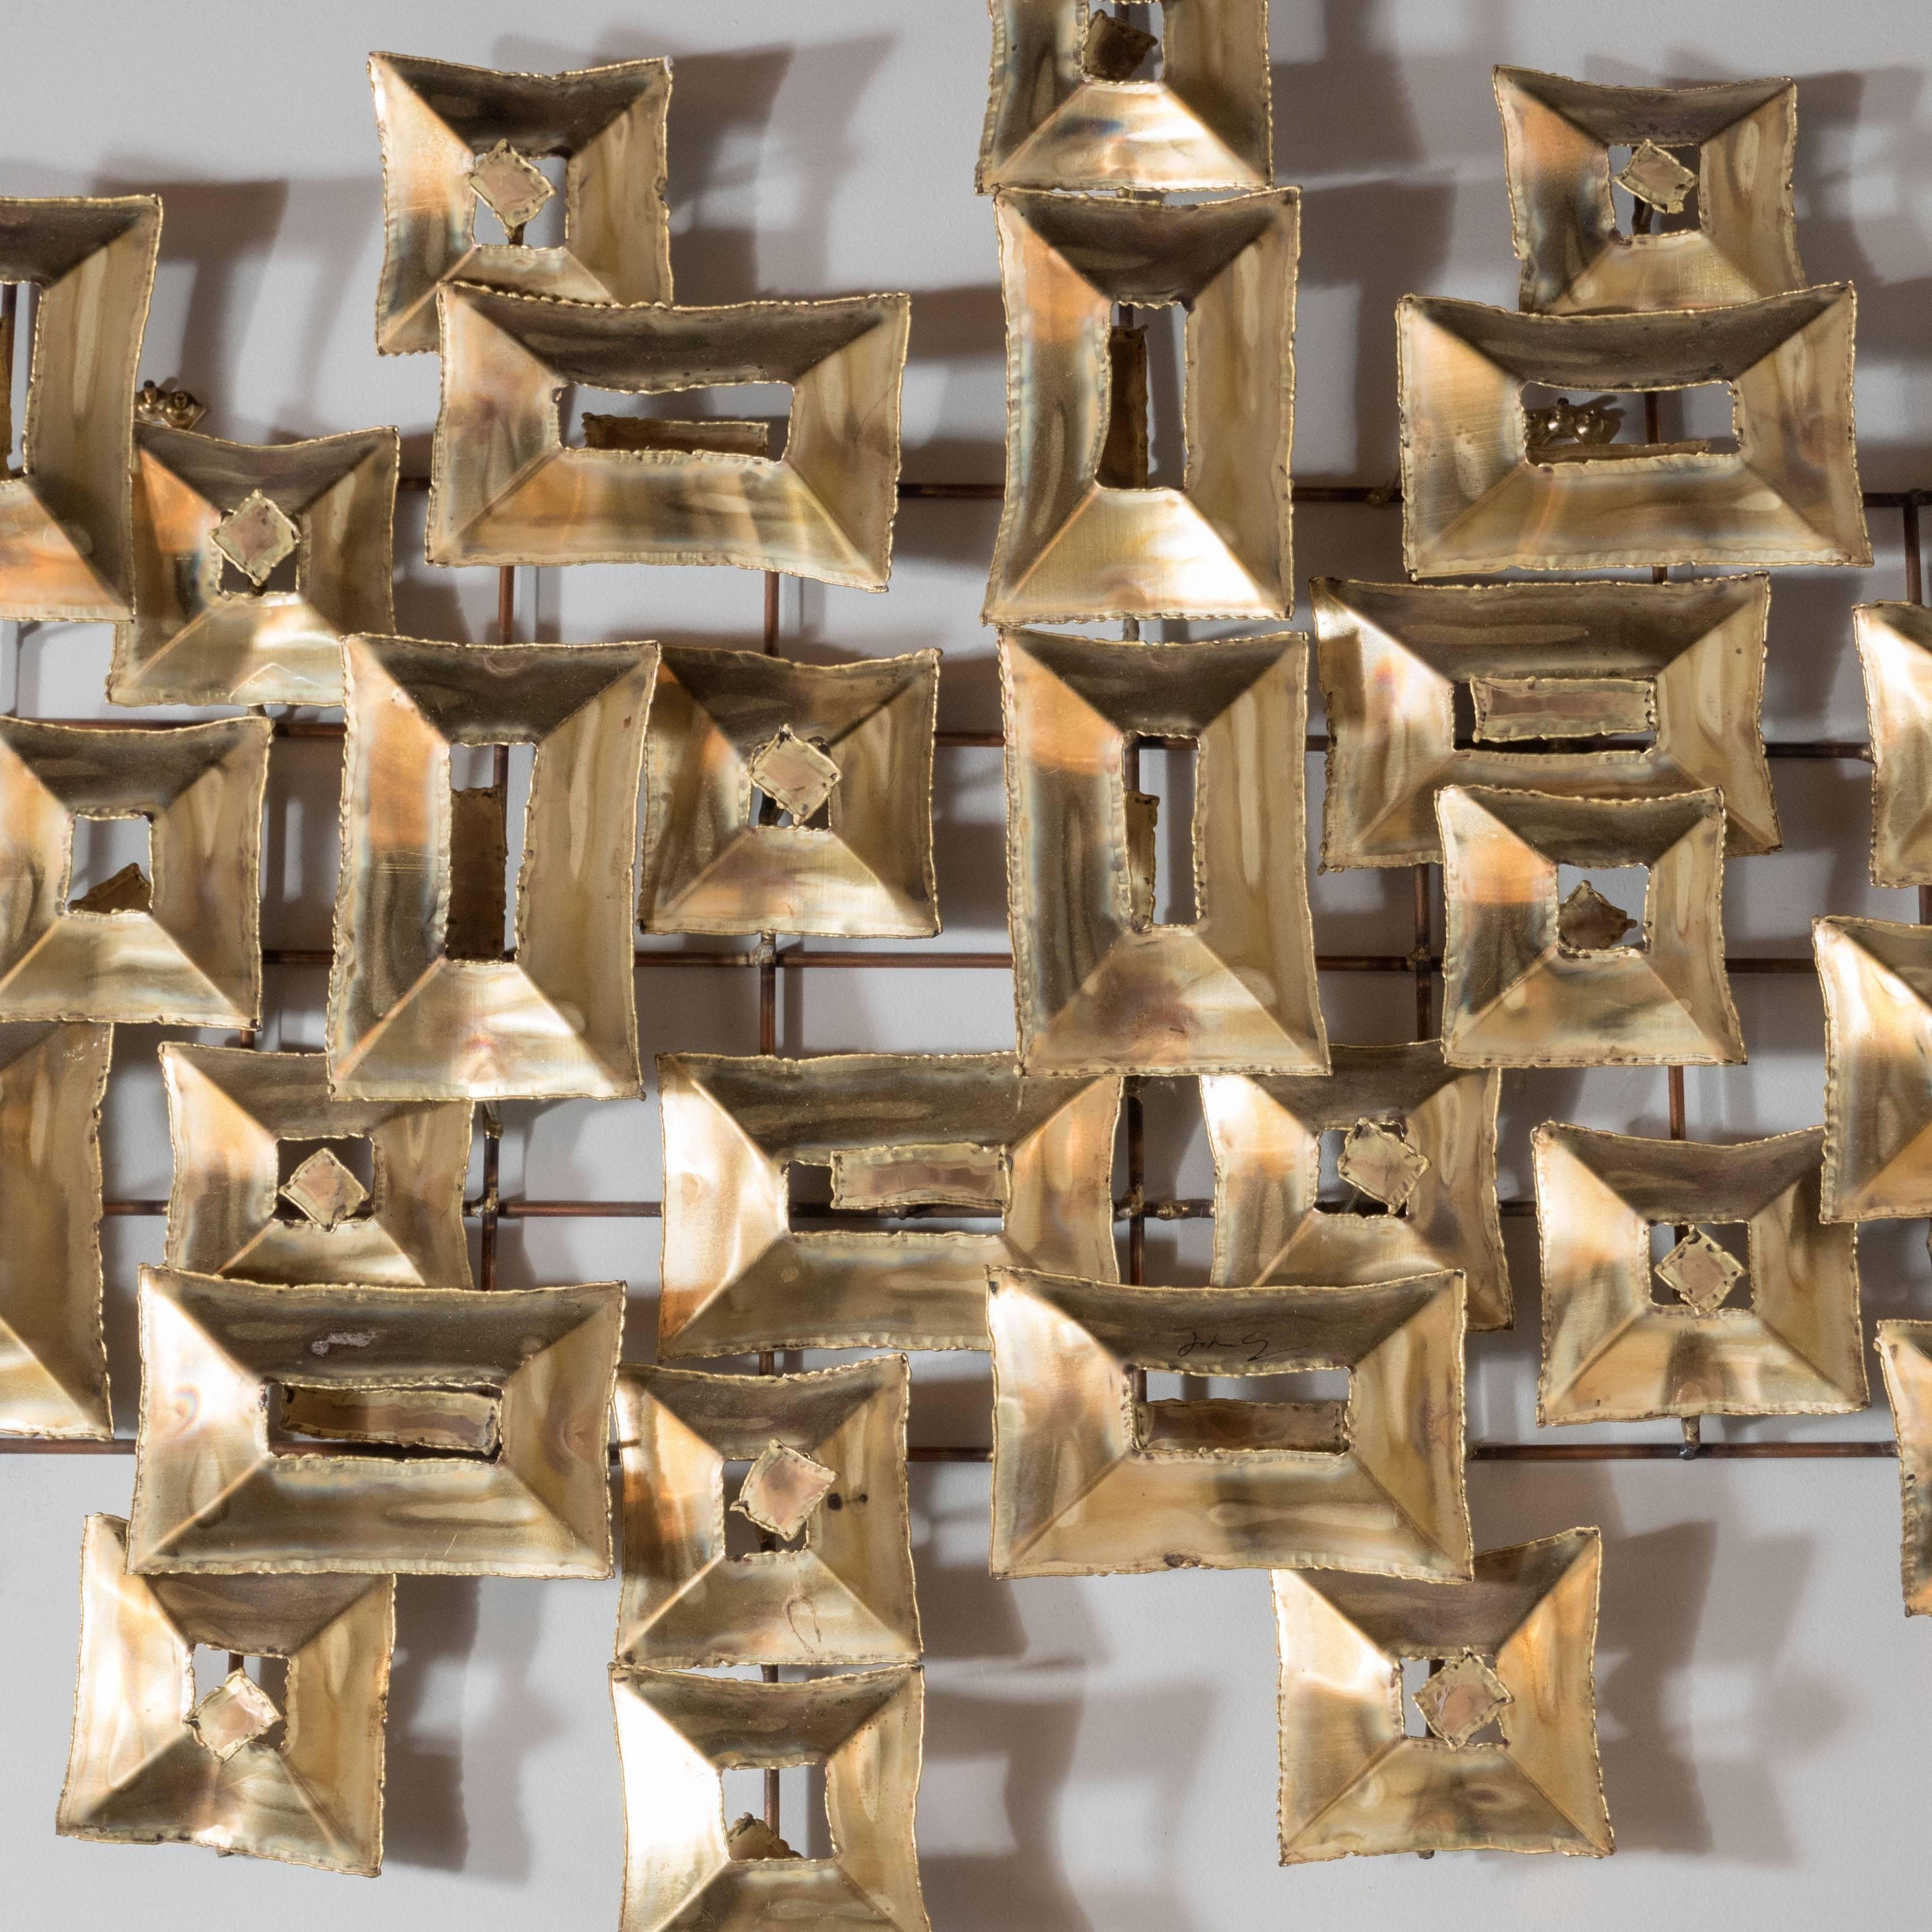 This stunning Brutalist wall sculpture by C. Jere with torch cut patined brass rectangular shapes that are invisibly affixed to the brass support, so as to give the impression of dynamic forms free floating in space. Mitchell Owens wrote for the